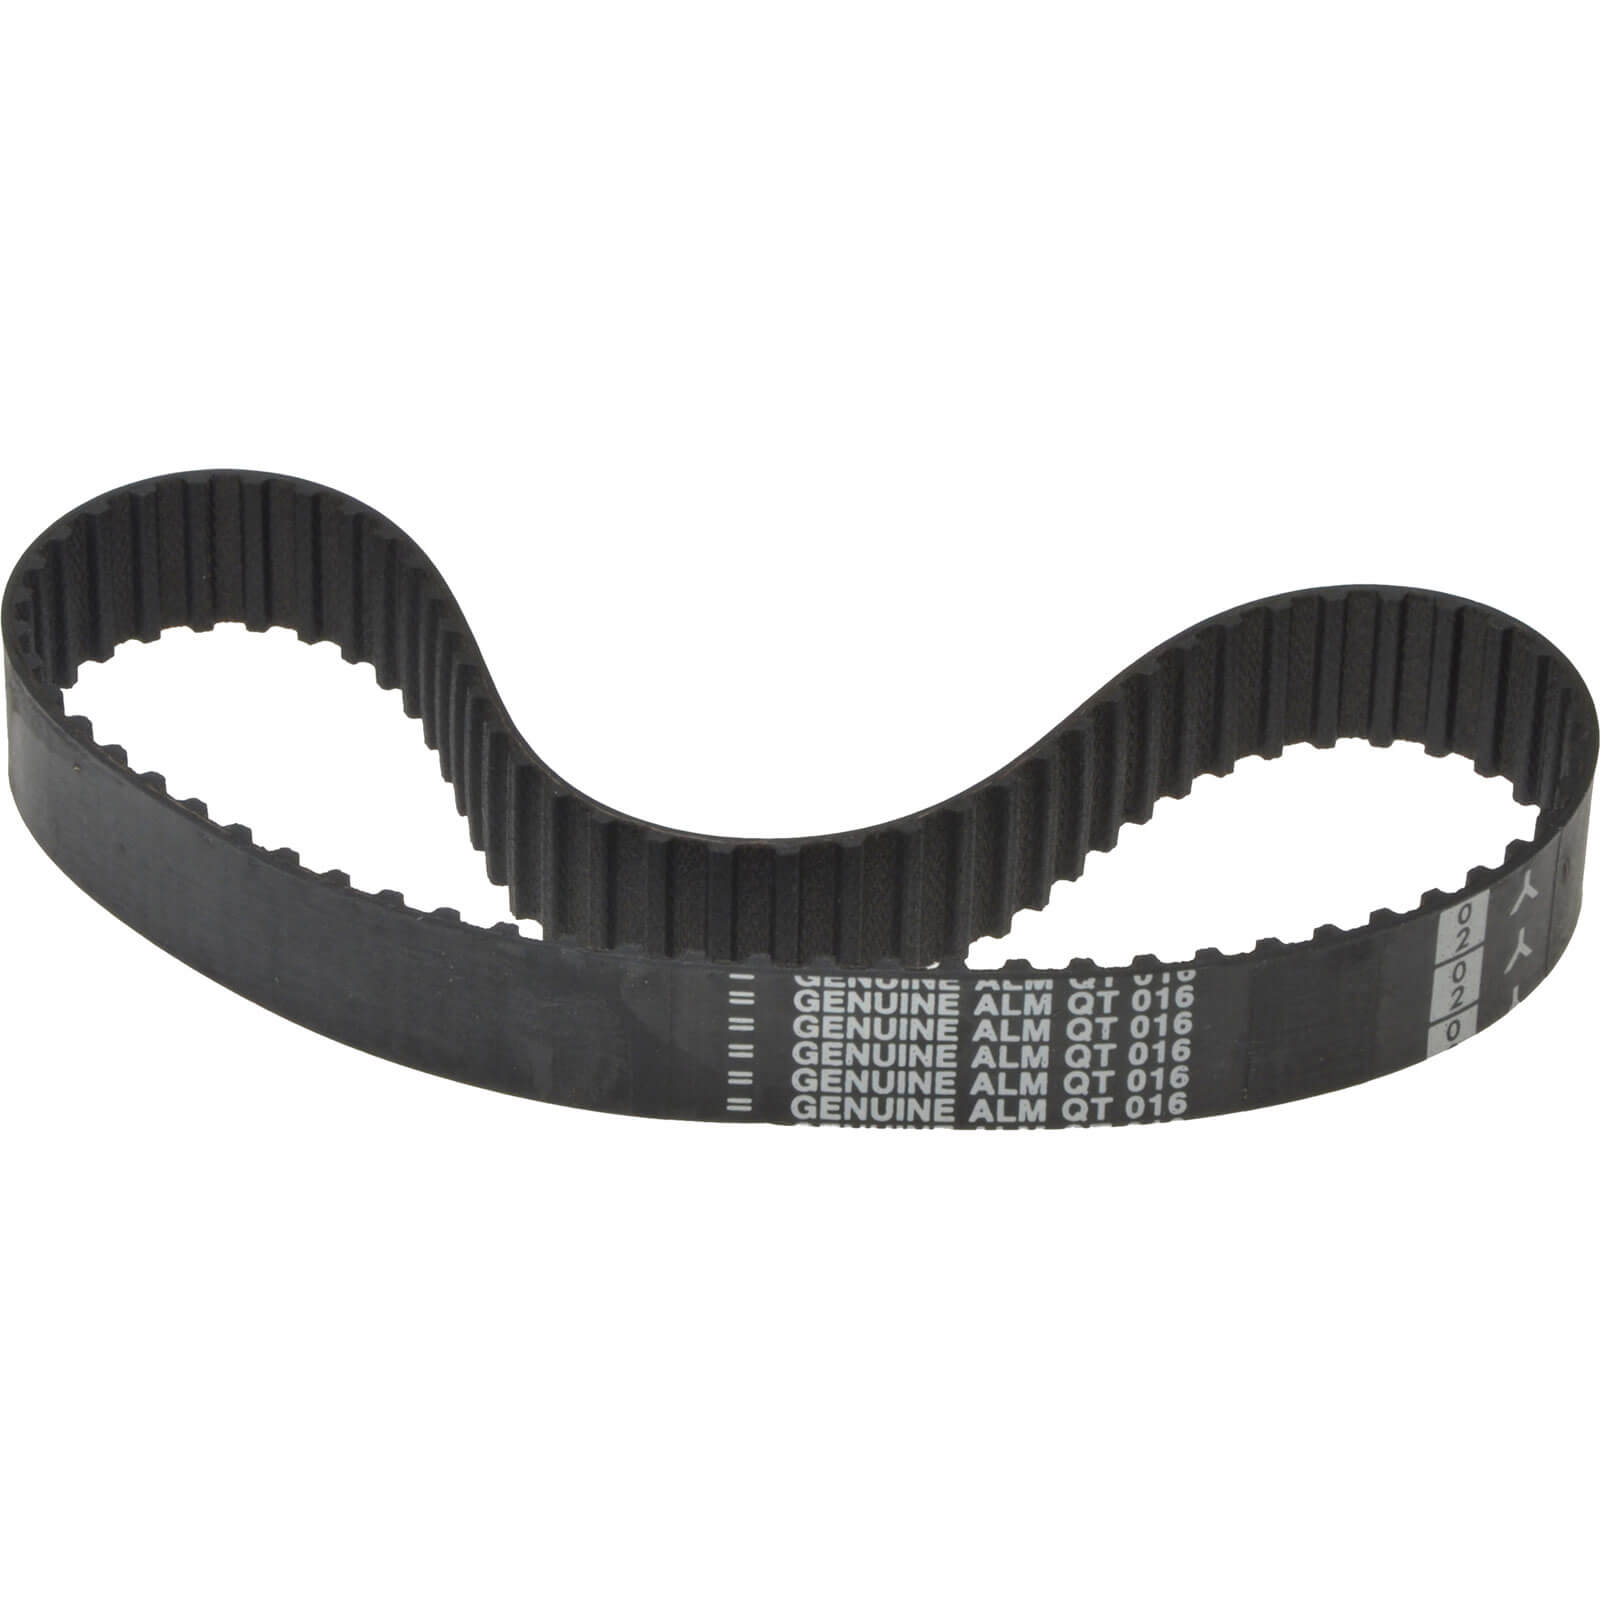 Image of ALM QT016 Drive Belt for Qualcast Front Grass Boxed Lawnmowers